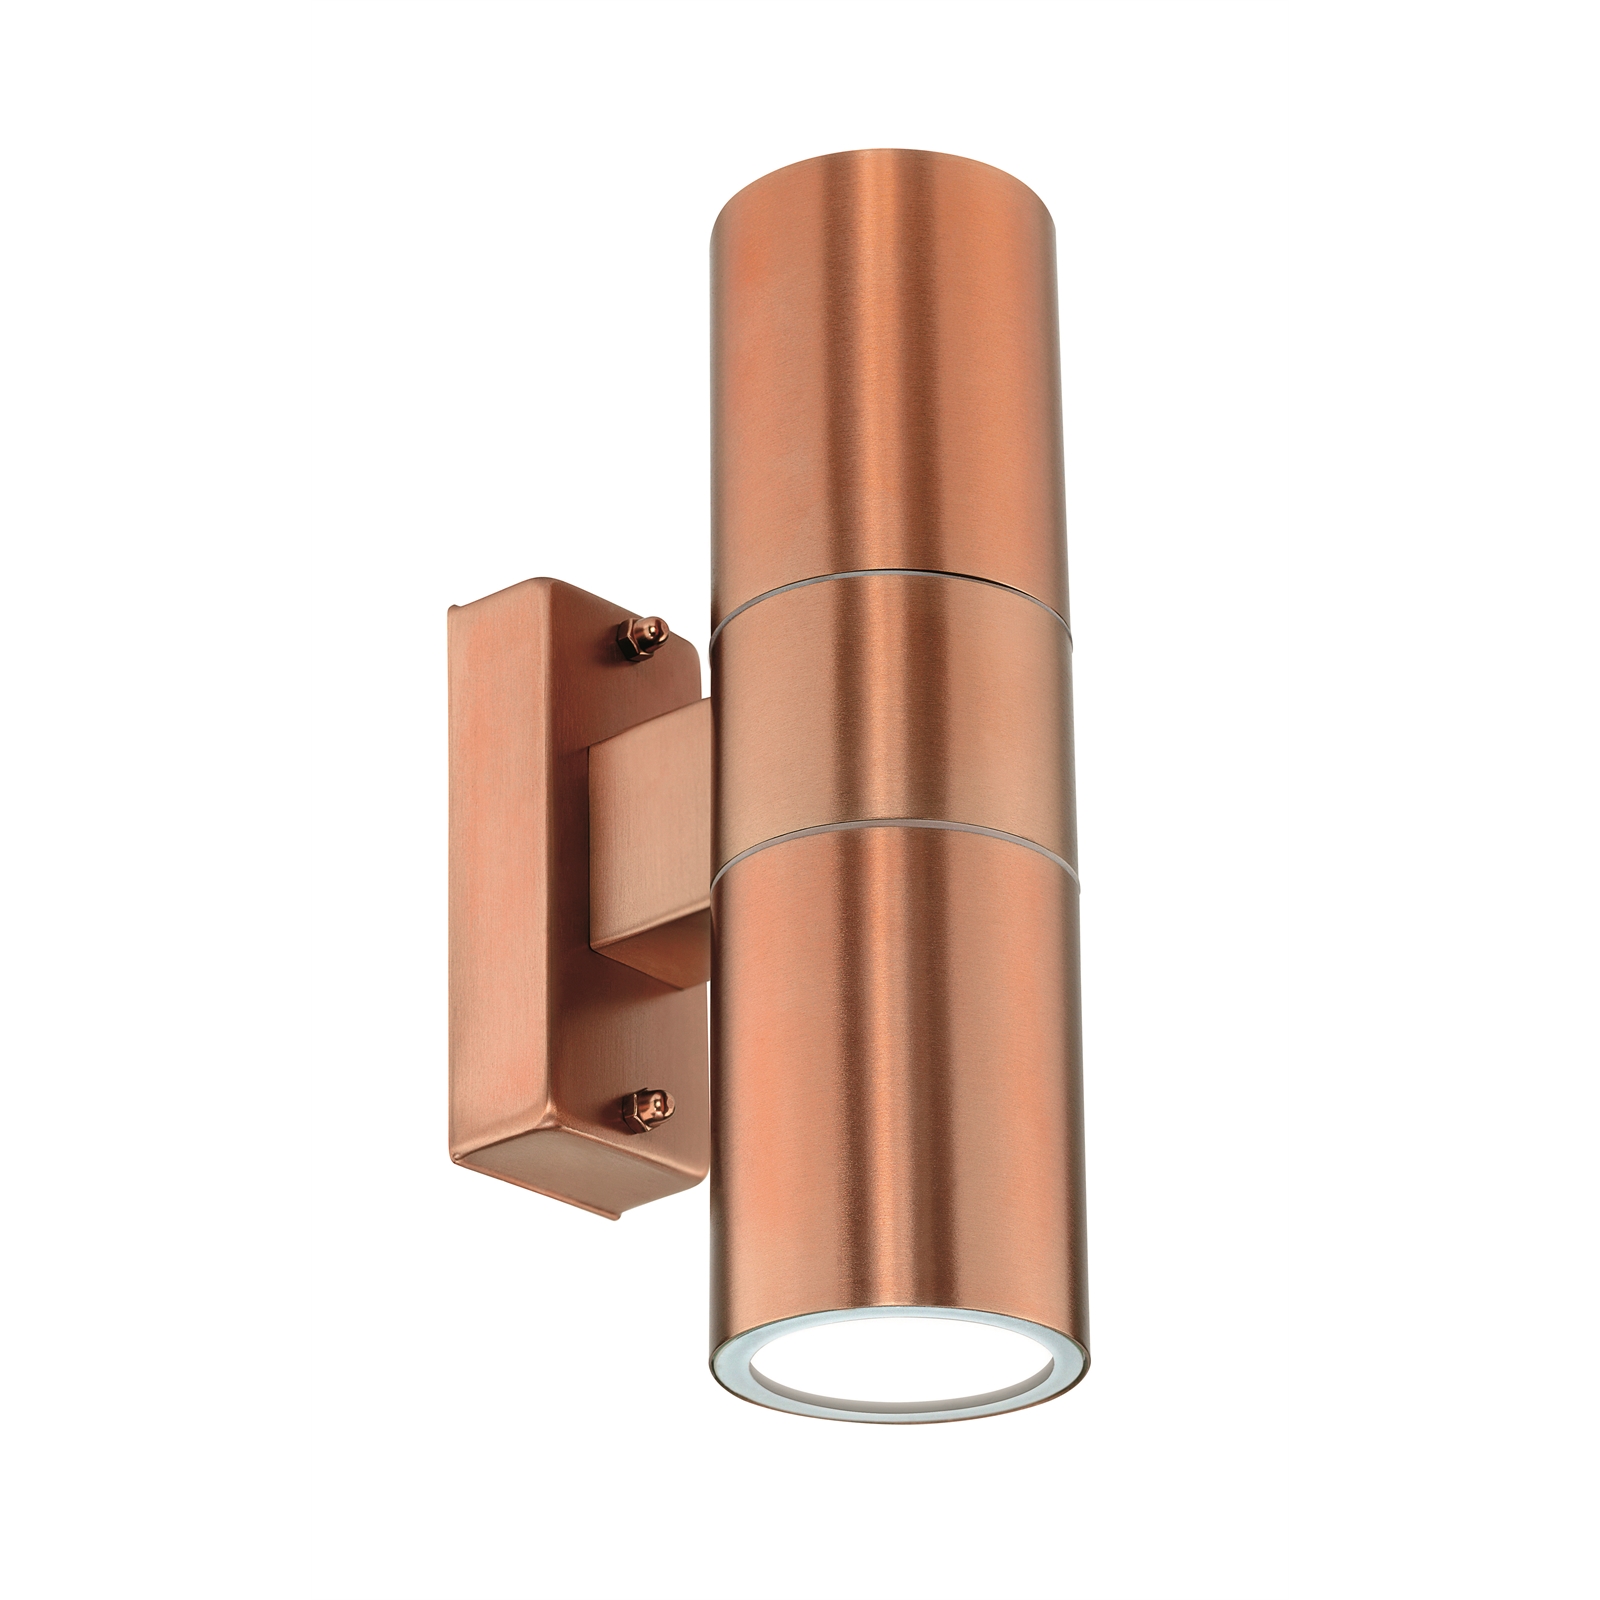 Brilliant 35W Copper Coolum Up Down Exterior Wall Light